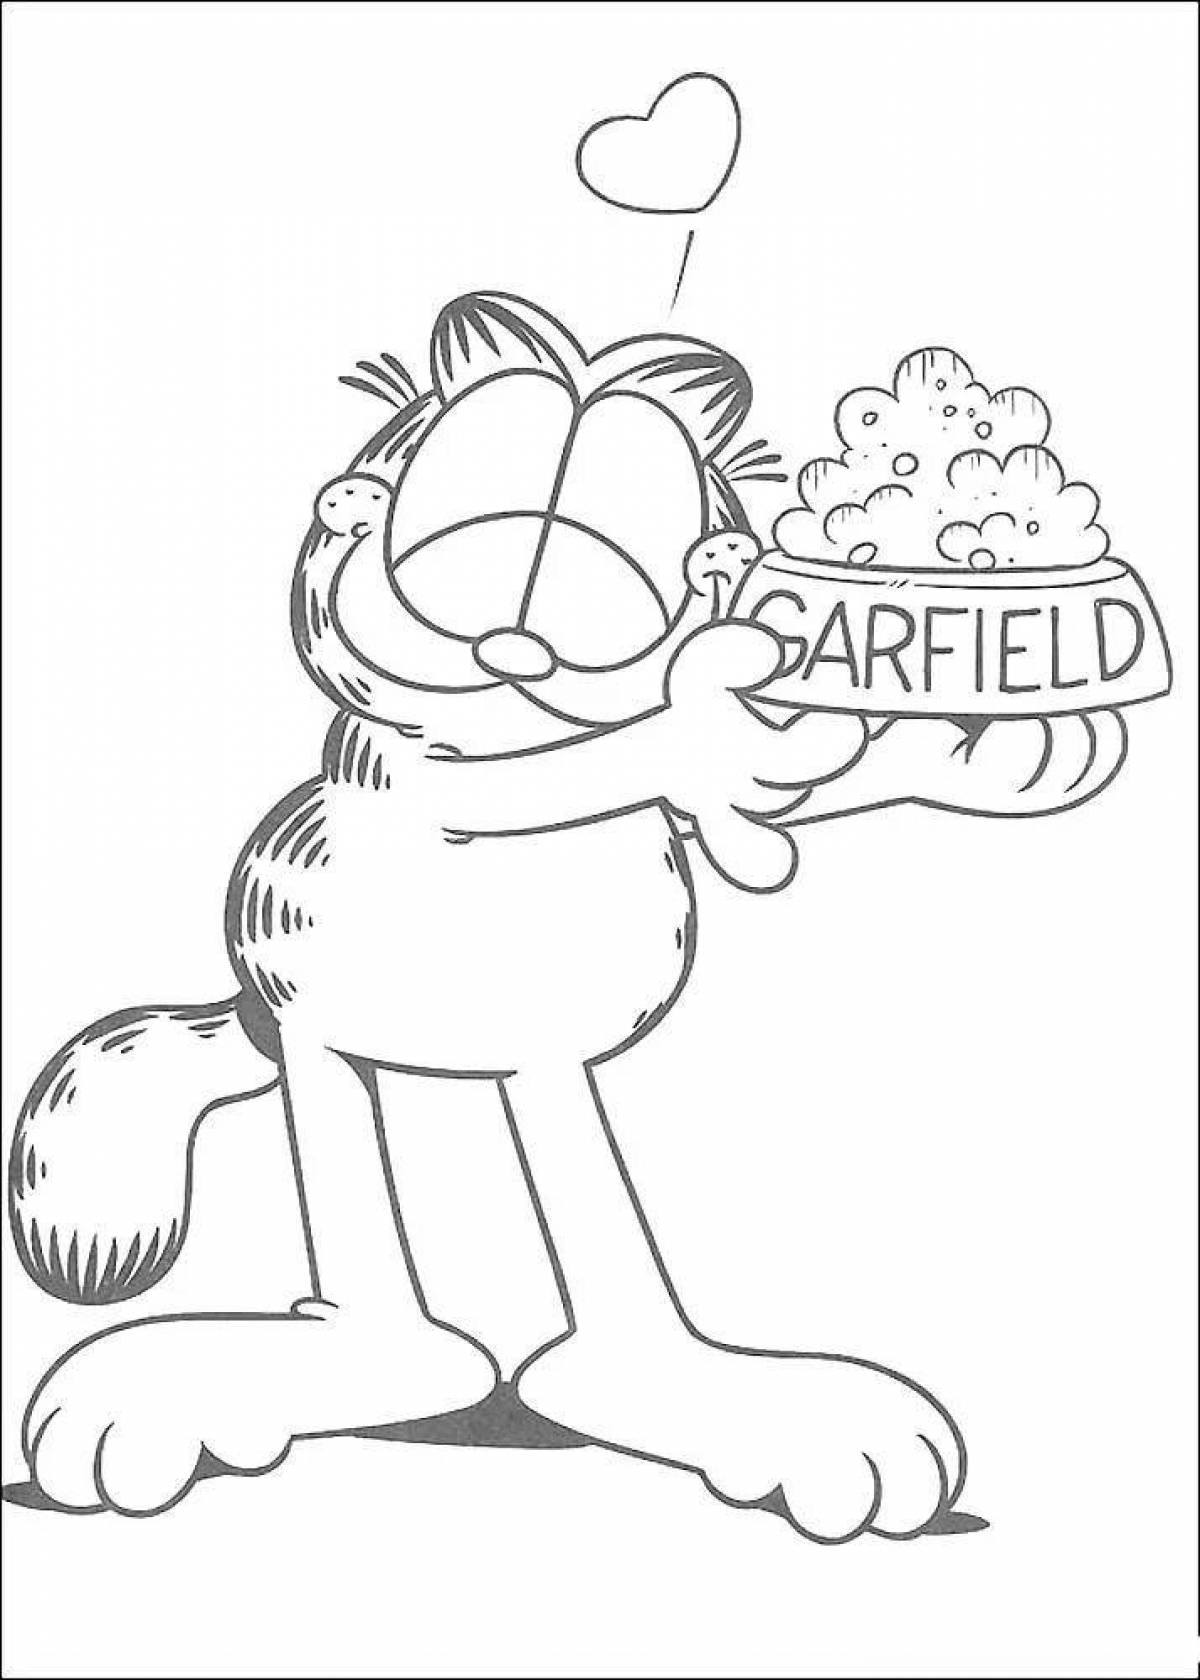 Animated garfield cat coloring page